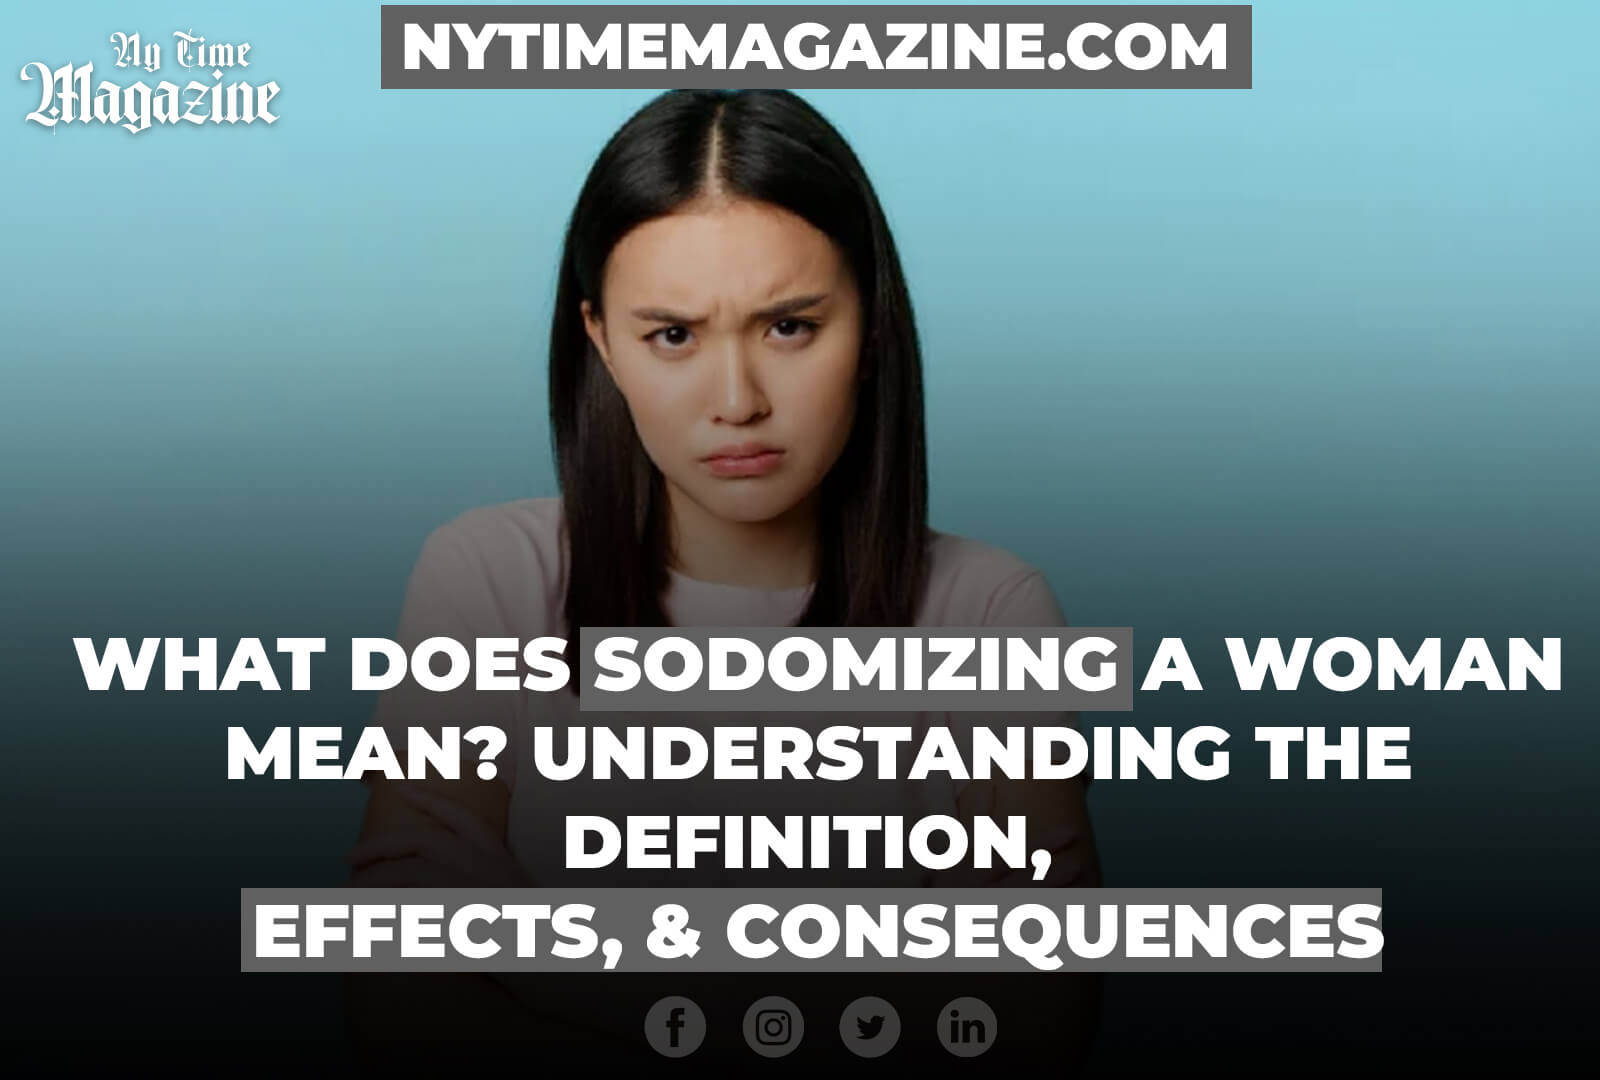 WHAT DOES SODOMIZING A WOMAN MEAN UNDERSTANDING THE DEFINITION, EFFECTS, AND CONSEQUENCES